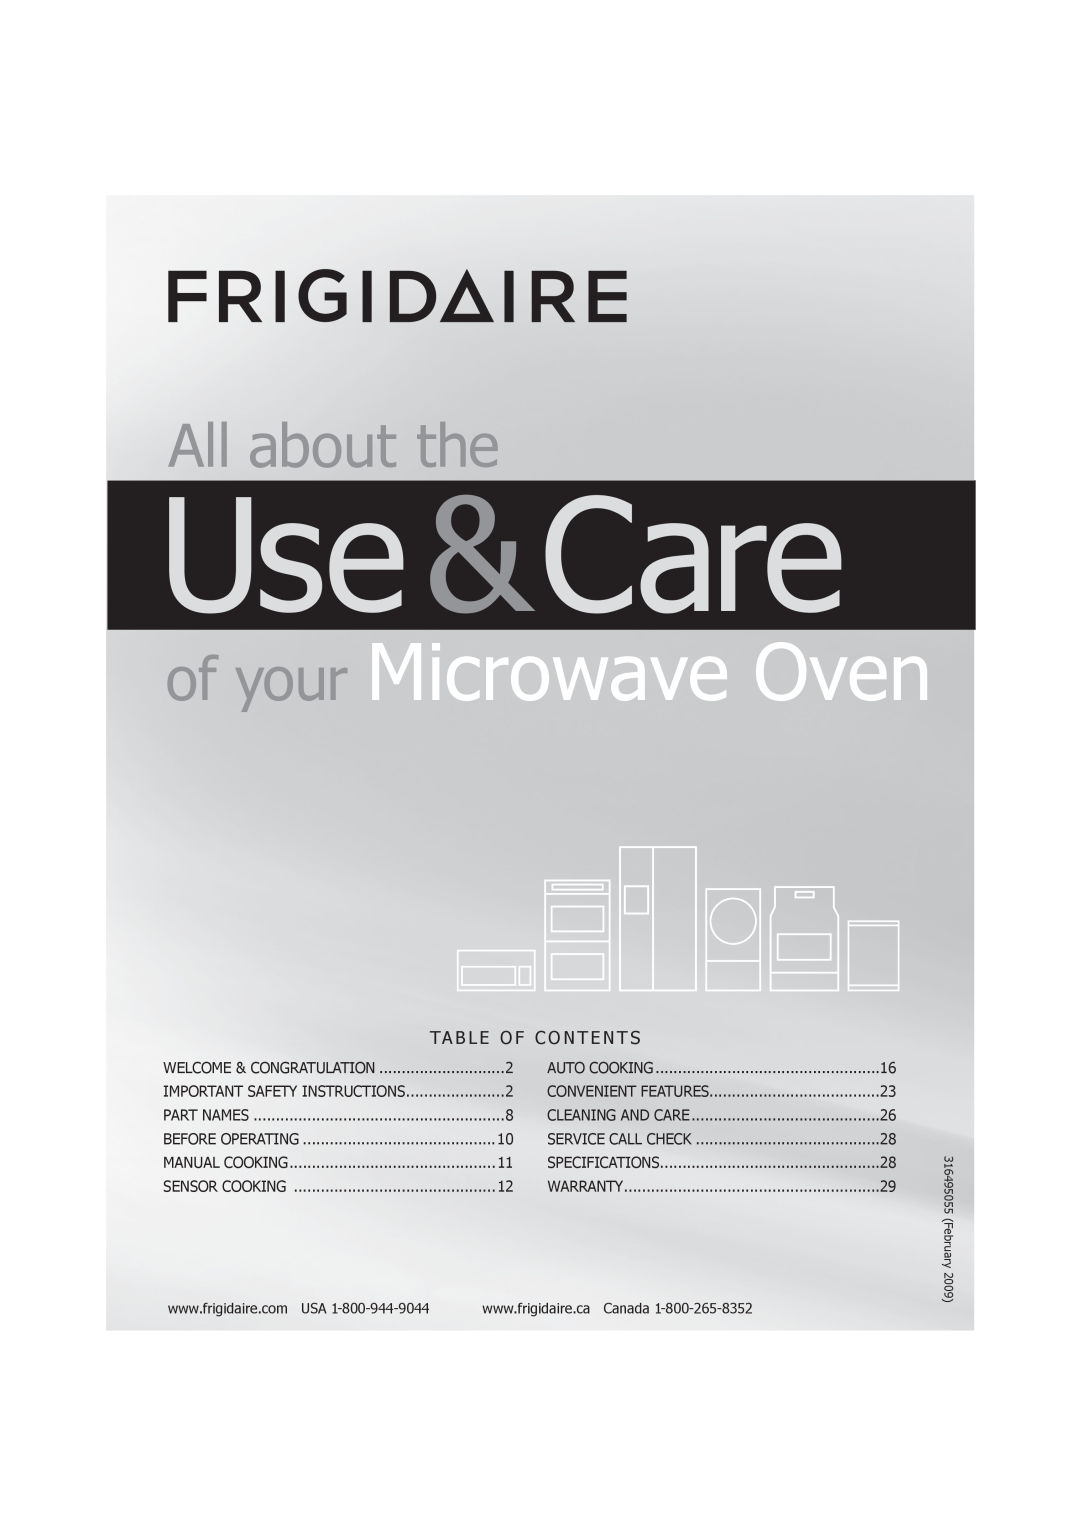 Frigidaire 316495055 important safety instructions Use &Care, of your Microwave Oven, All about the 